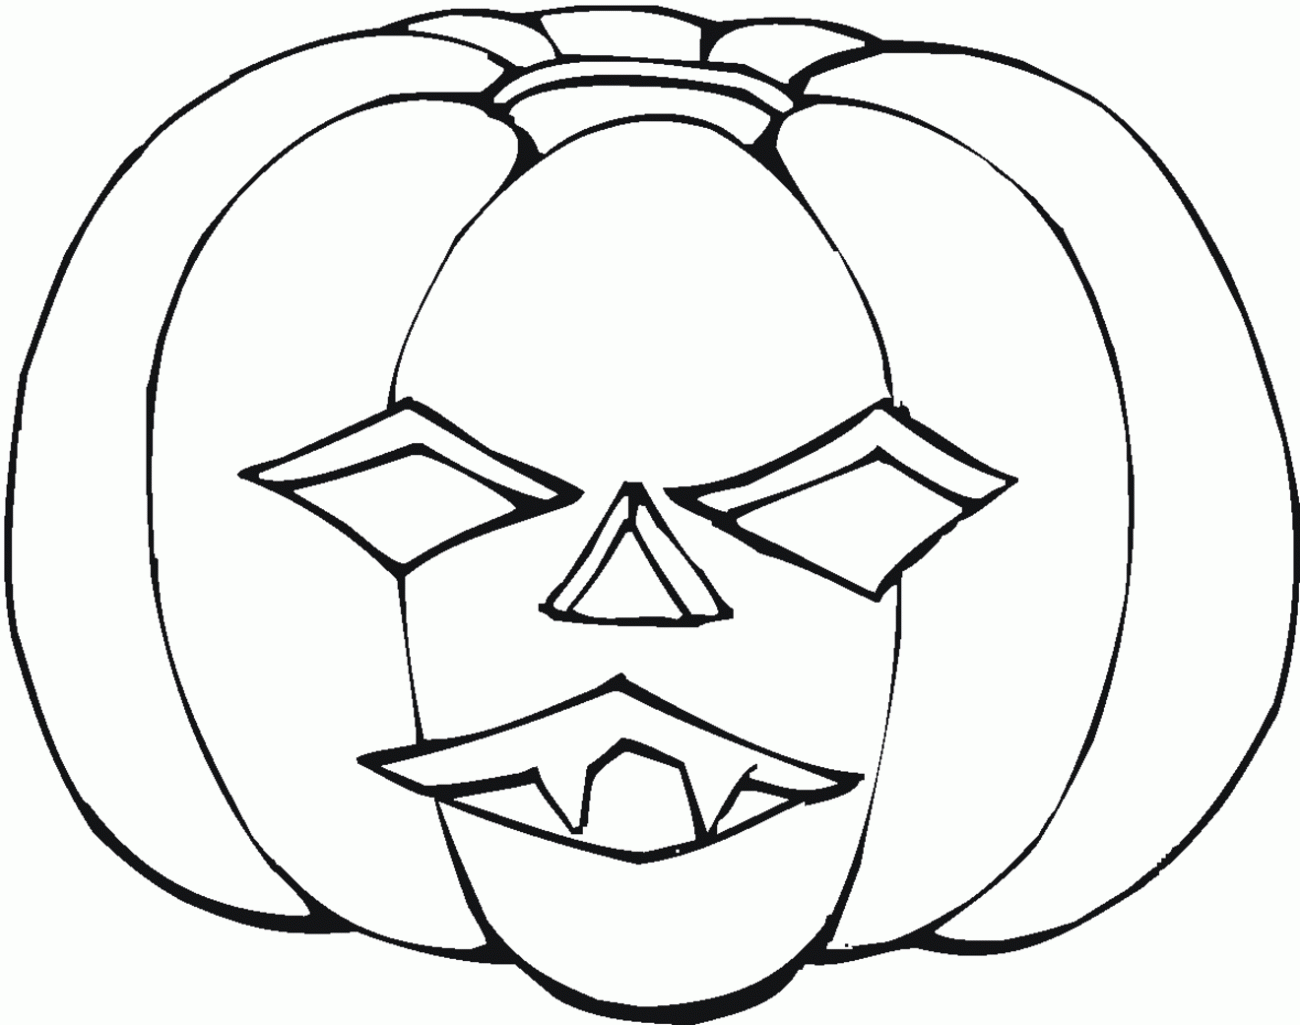 Free Printable Halloween Pumpkin Coloring Pages | Free Coloring Pages